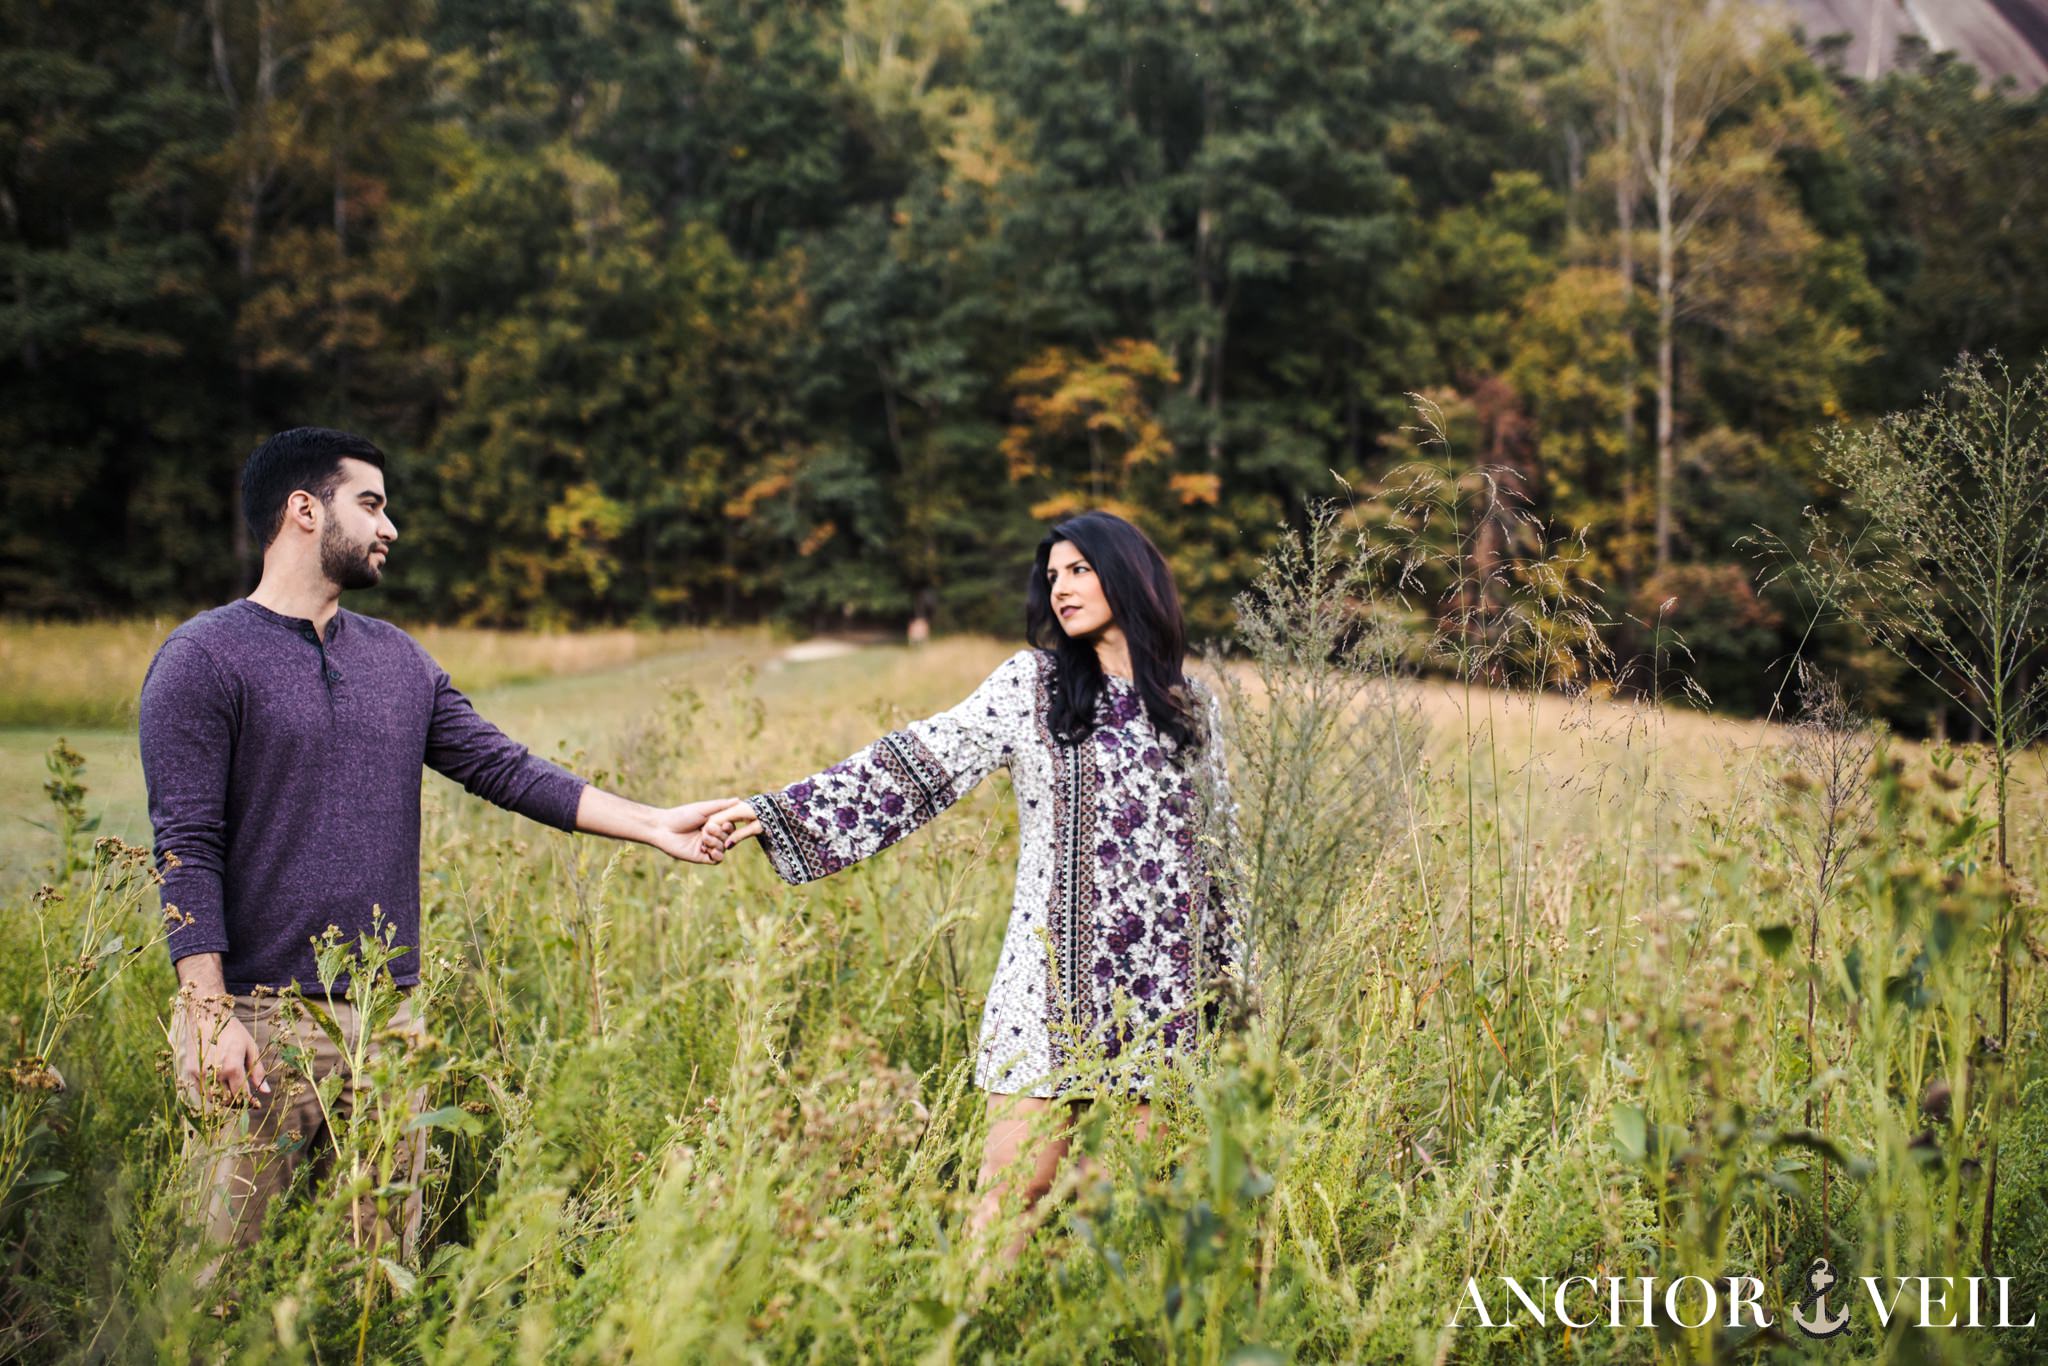 walking through the bushes hand in hand during the Stone Mountain Engagement Session